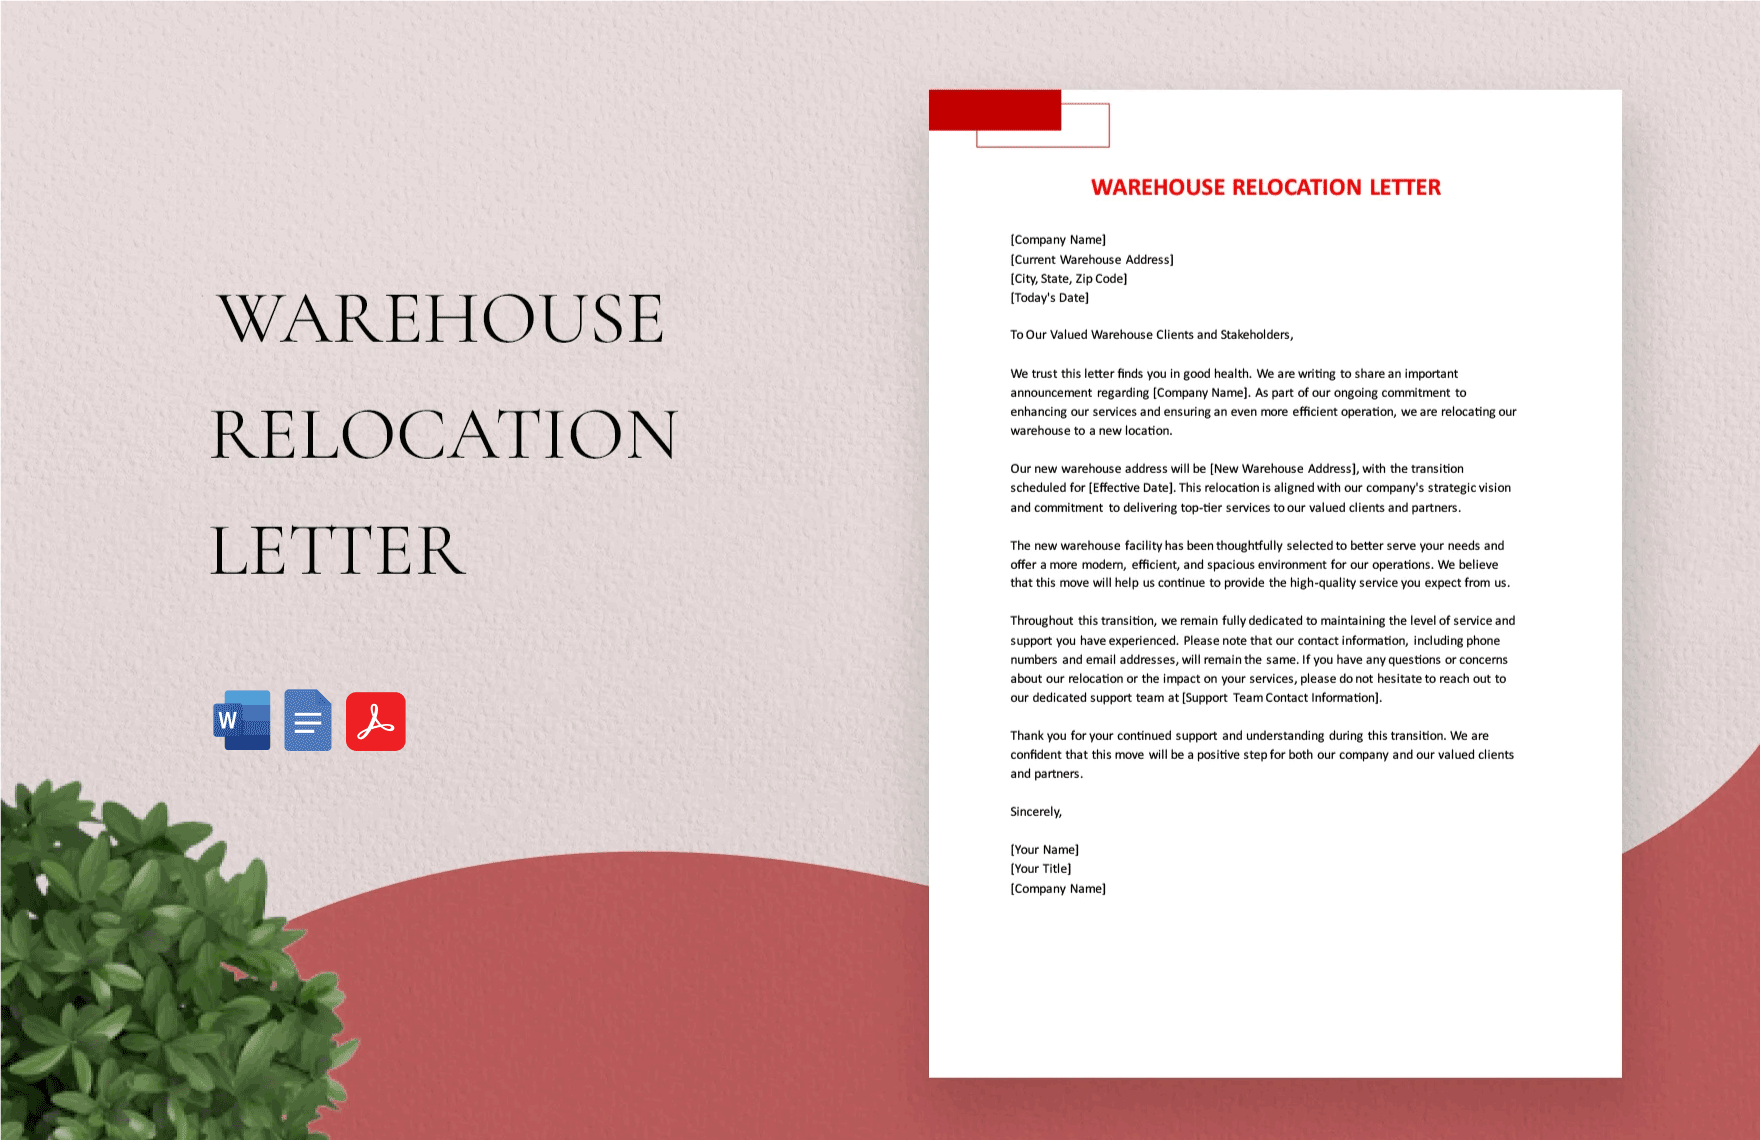 Warehouse Relocation Letter in Word, Google Docs, PDF